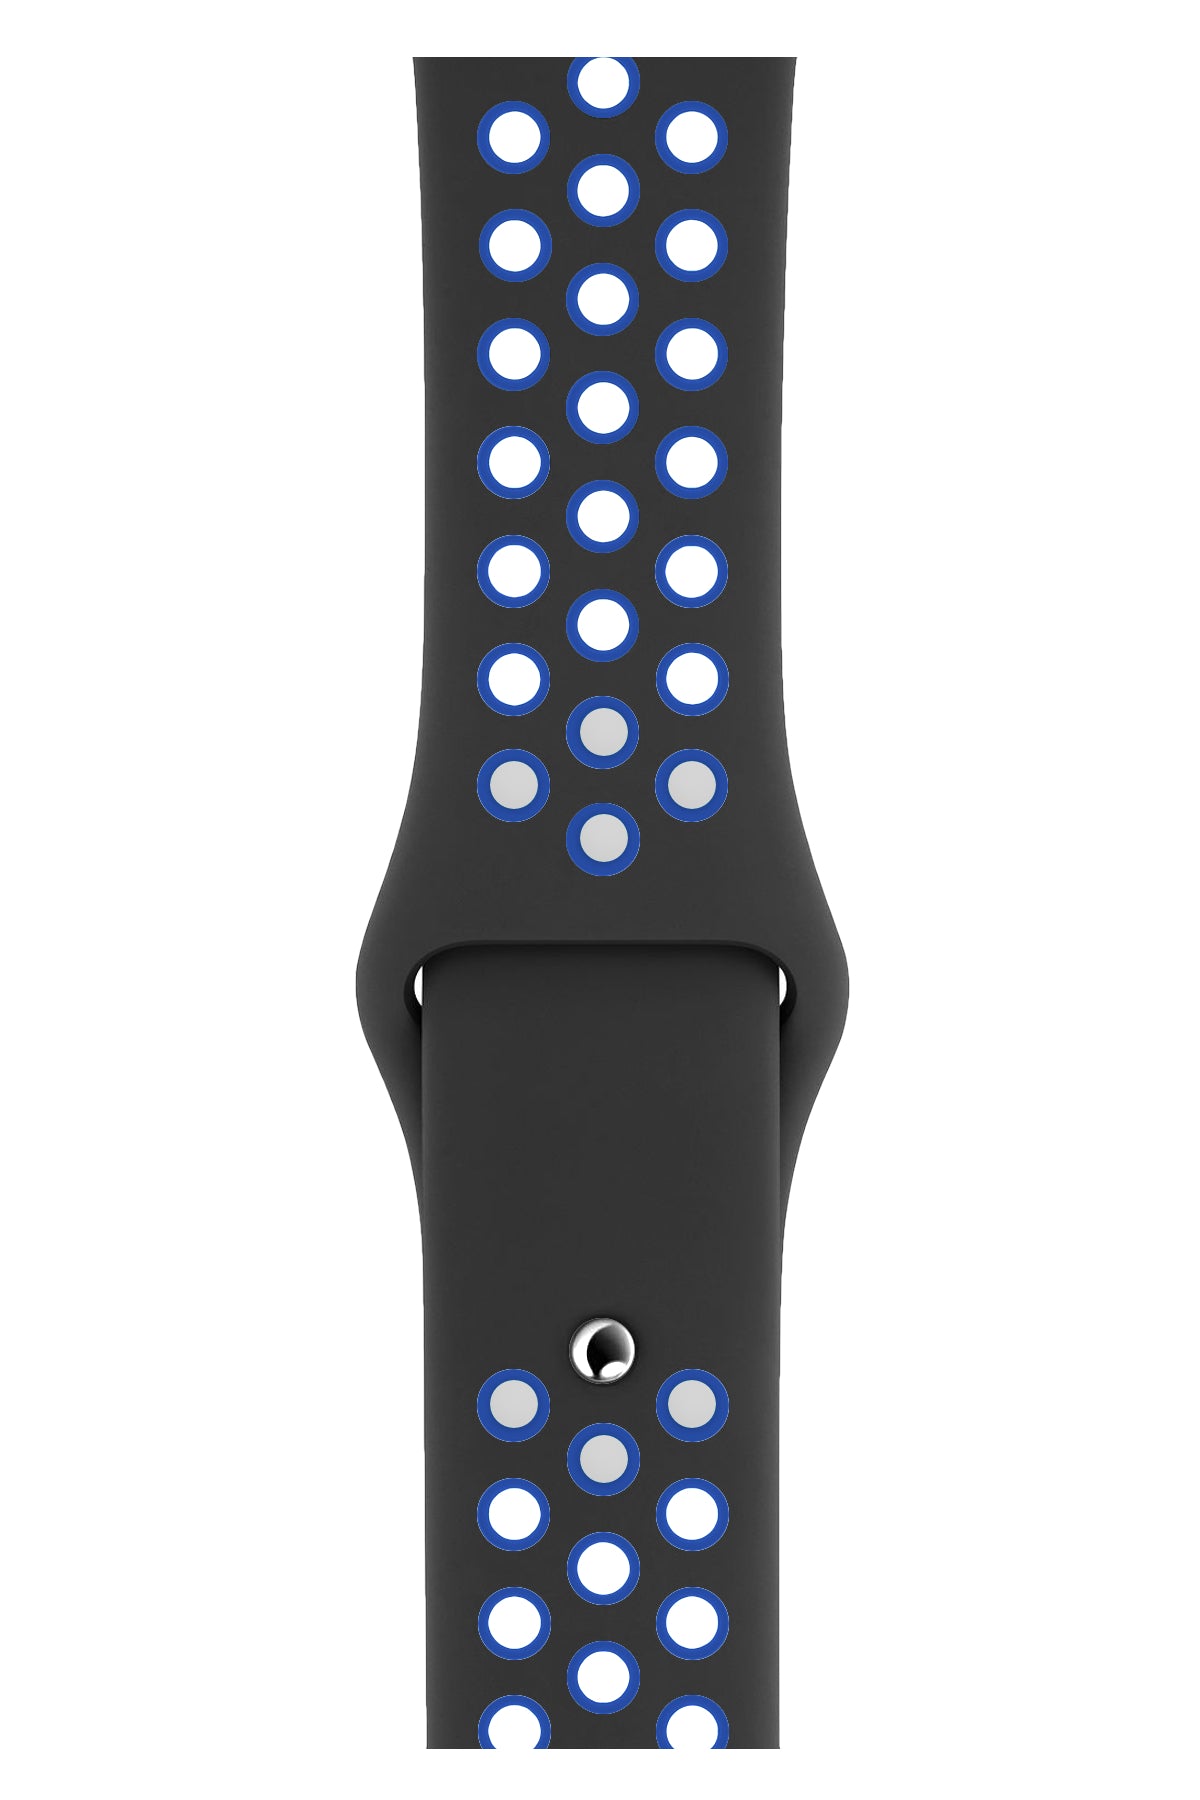 Apple Watch Compatible Silicone Perforated Sport Band Black Blue 